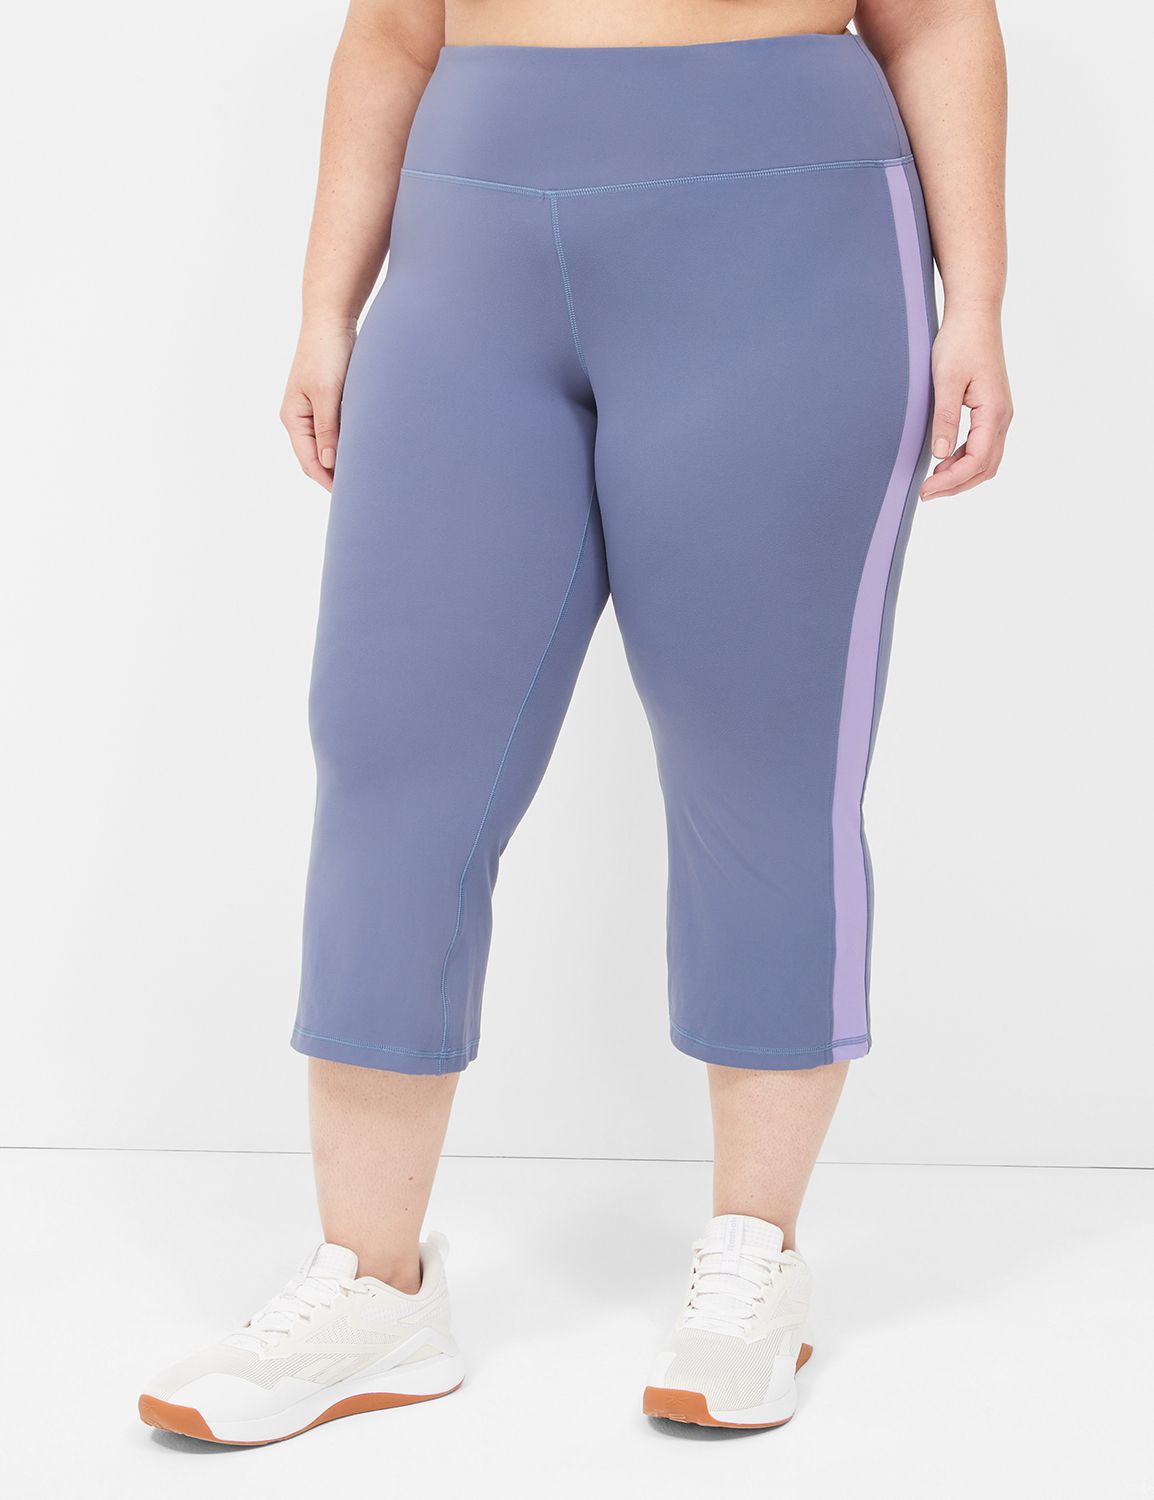 RUNNER ISLAND Womens Plus Size Workout Capris with Tummy Control, Pocket,  Trendy Lattice & Stretch at  Women's Clothing store